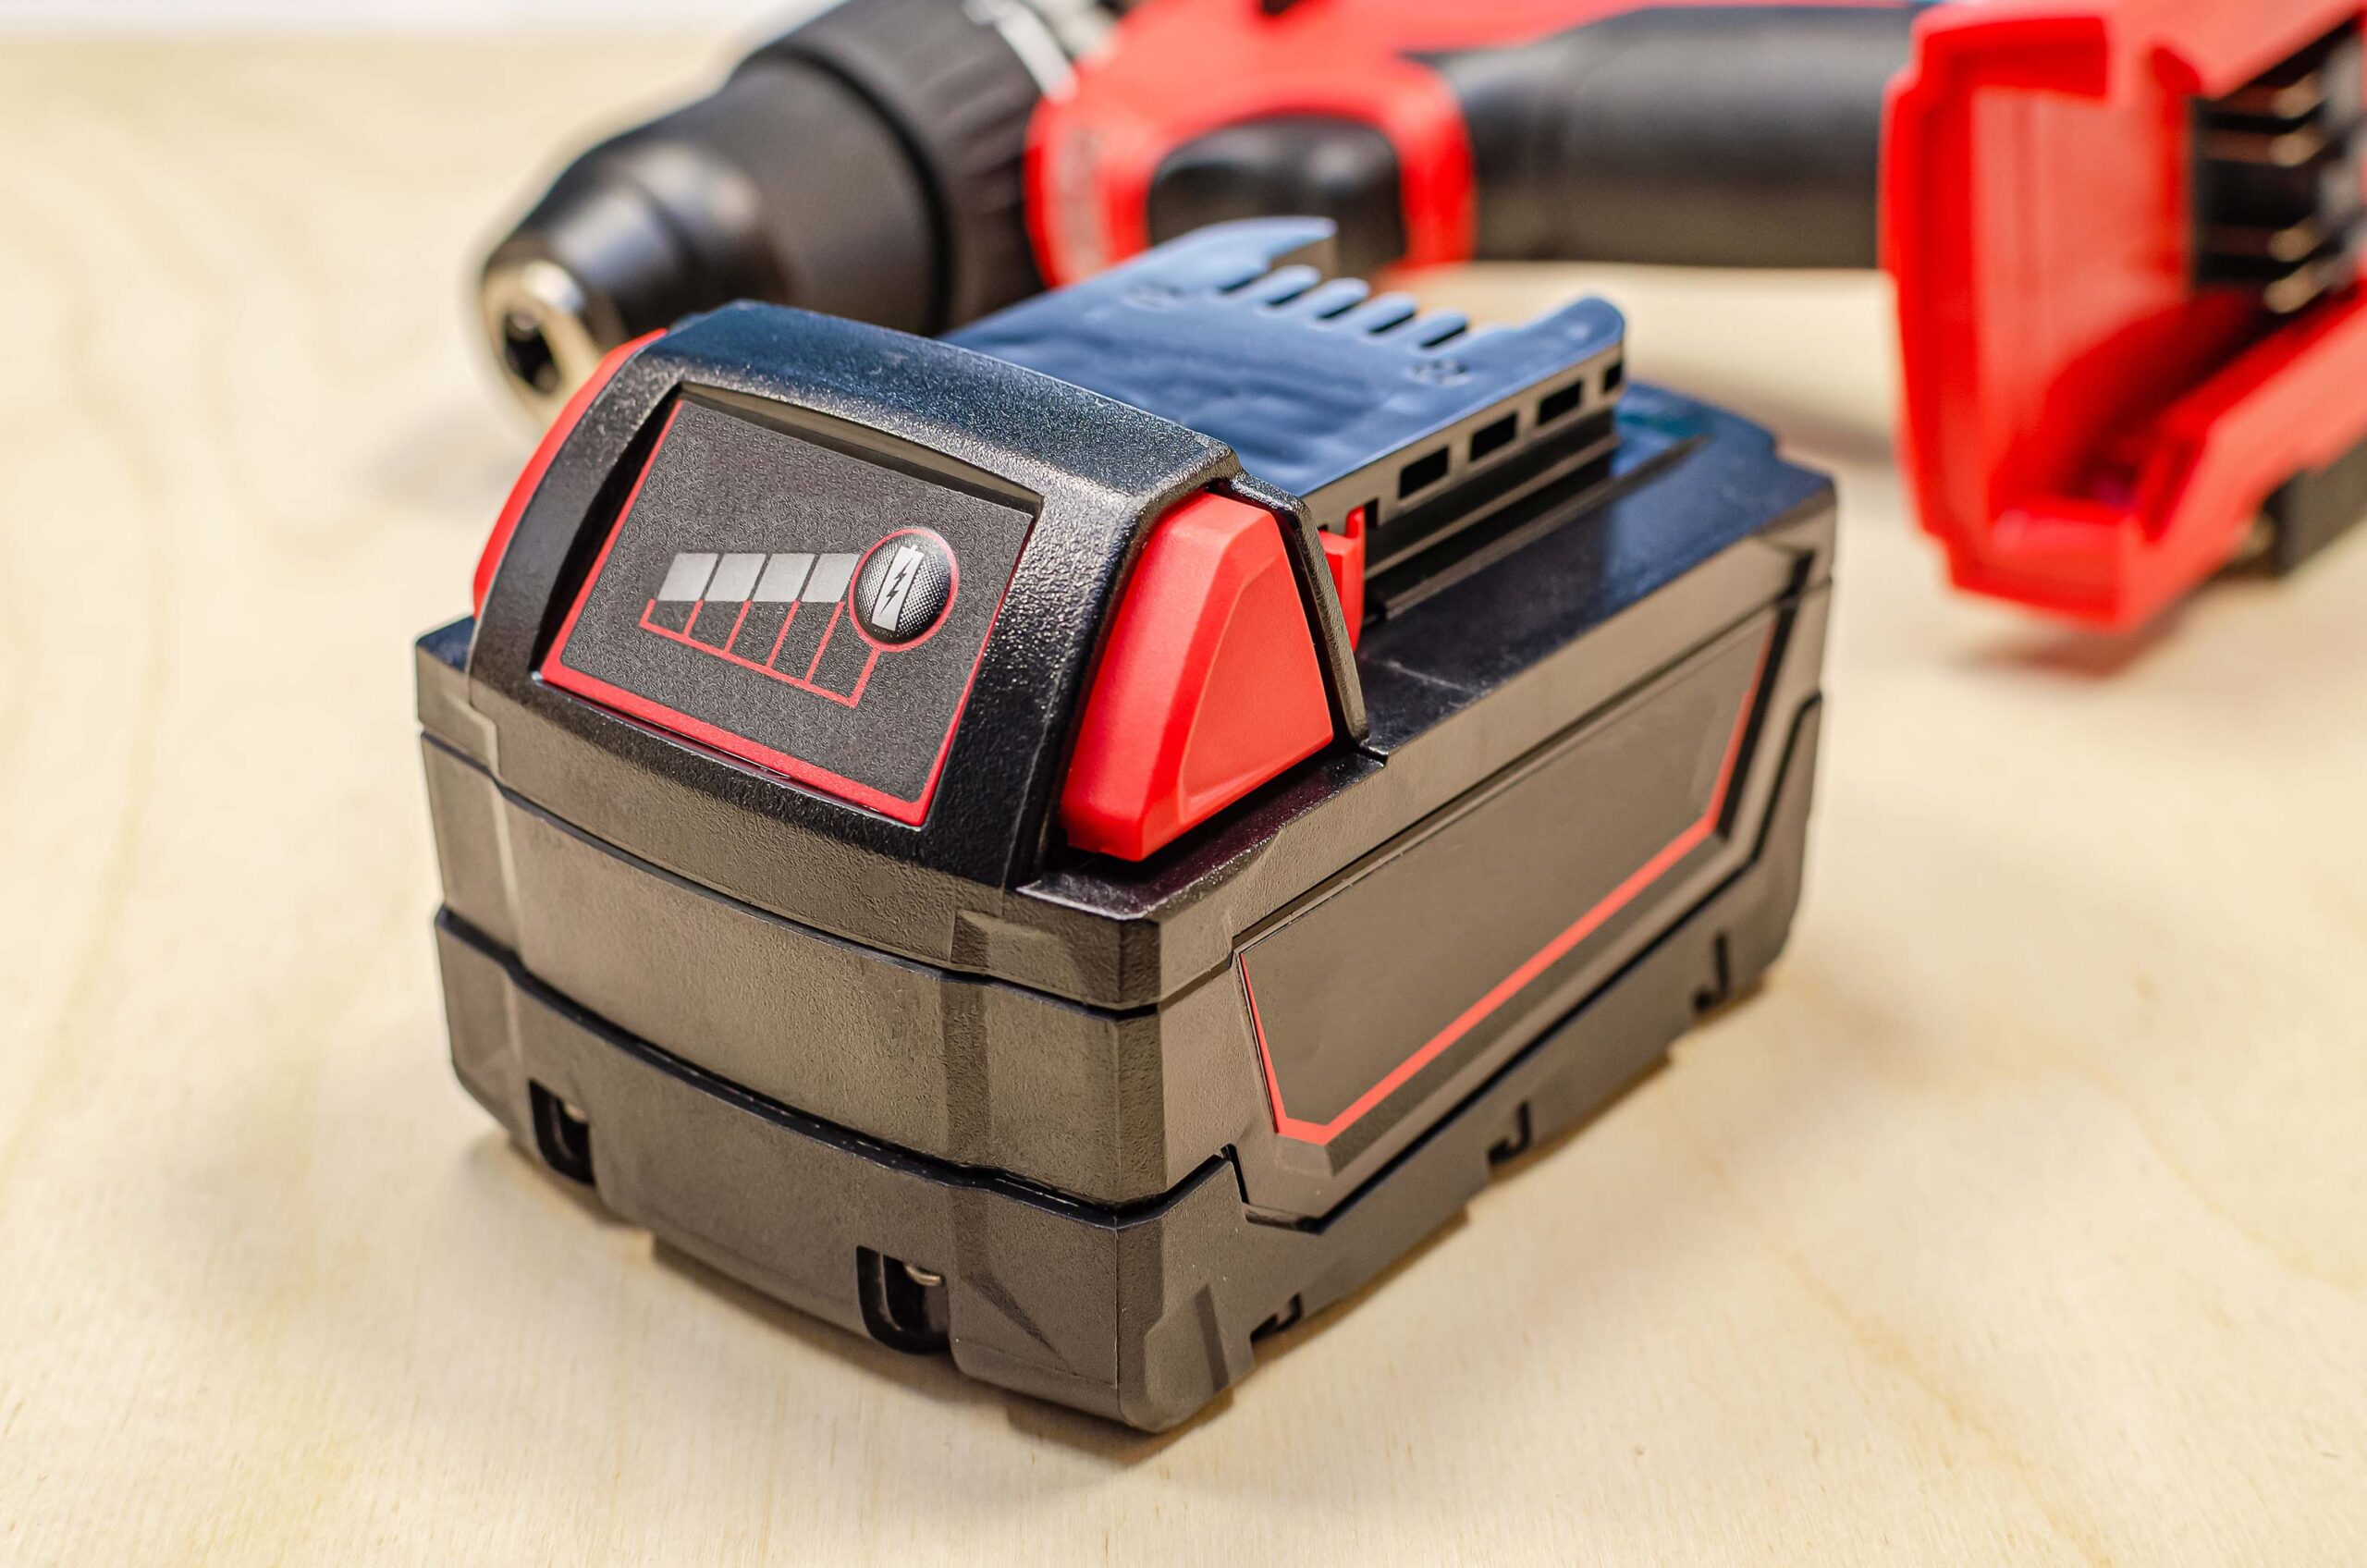 How to Properly Maintain And Extend the Life of a Cordless Tool Battery?